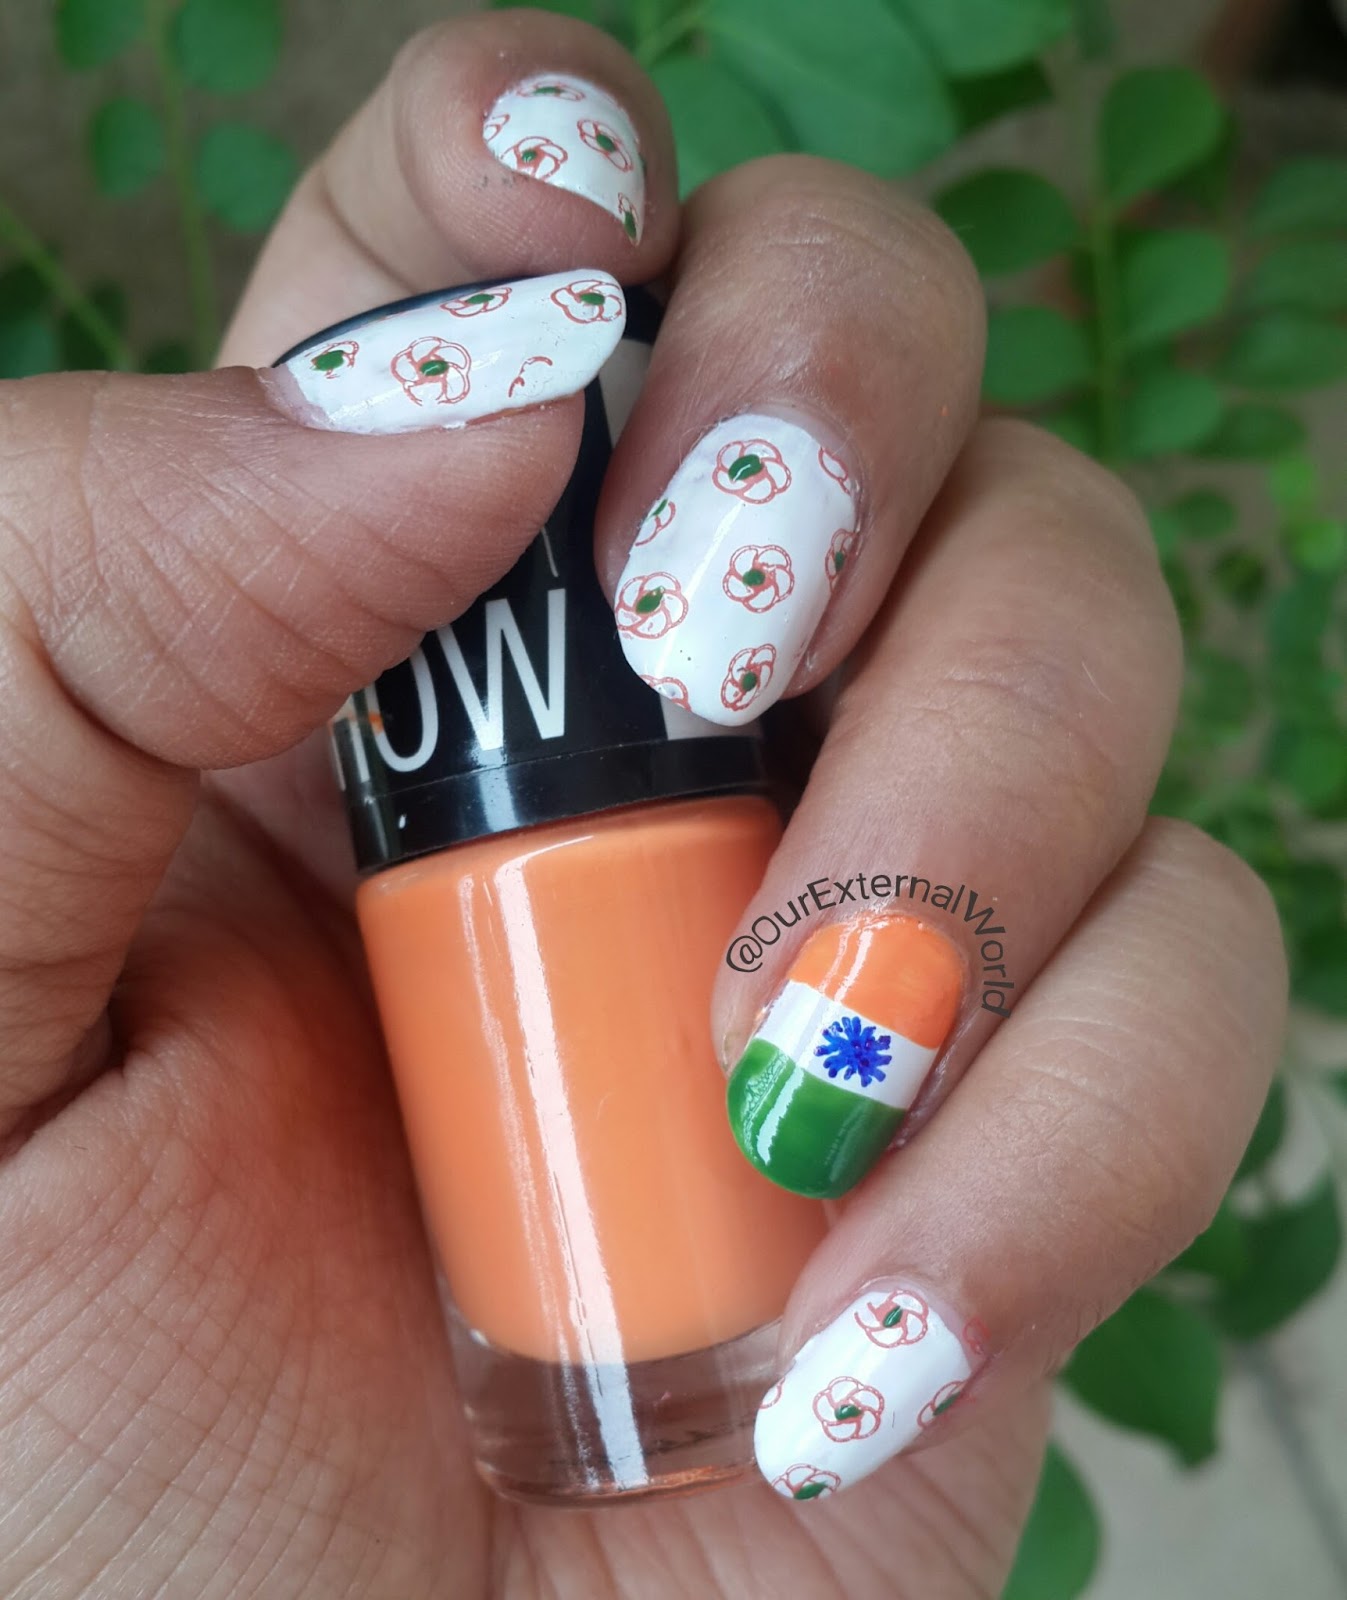 Indian Flag Art On Nail Independence Stock Photo 696727456 | Shutterstock